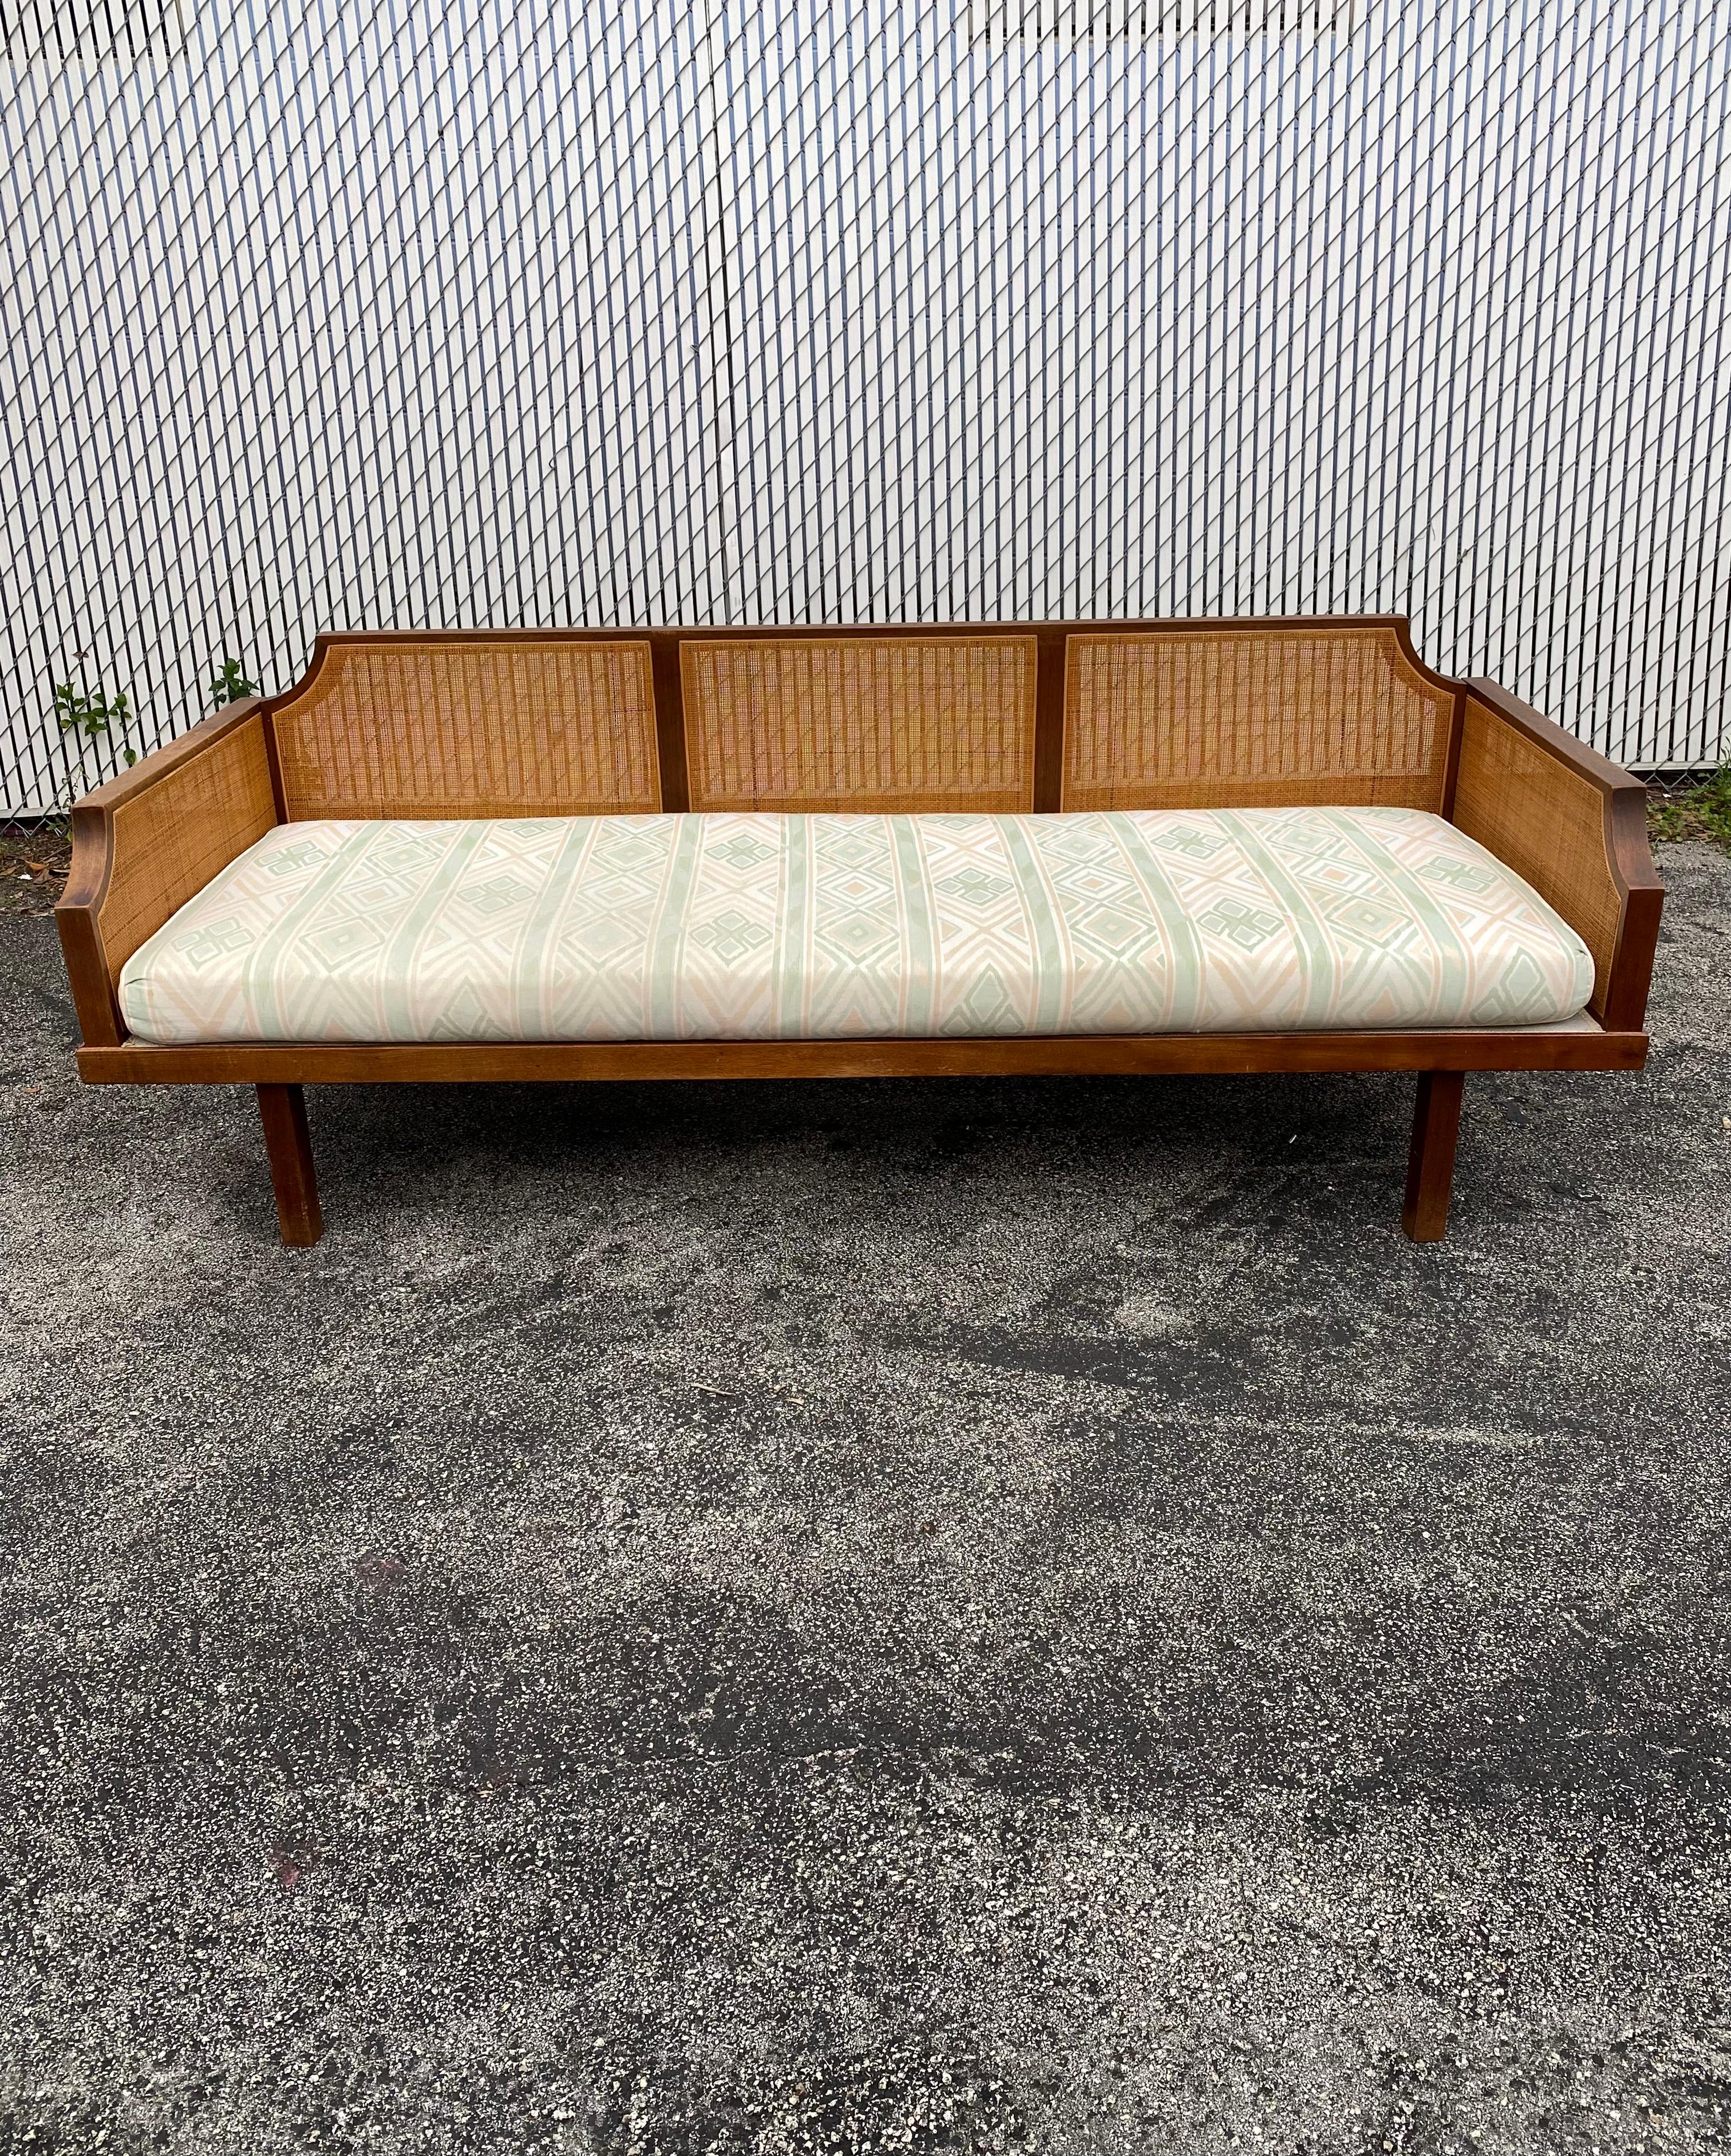 Upholstery 1960s Mid-Century Teak Cane Sofa or Daybed